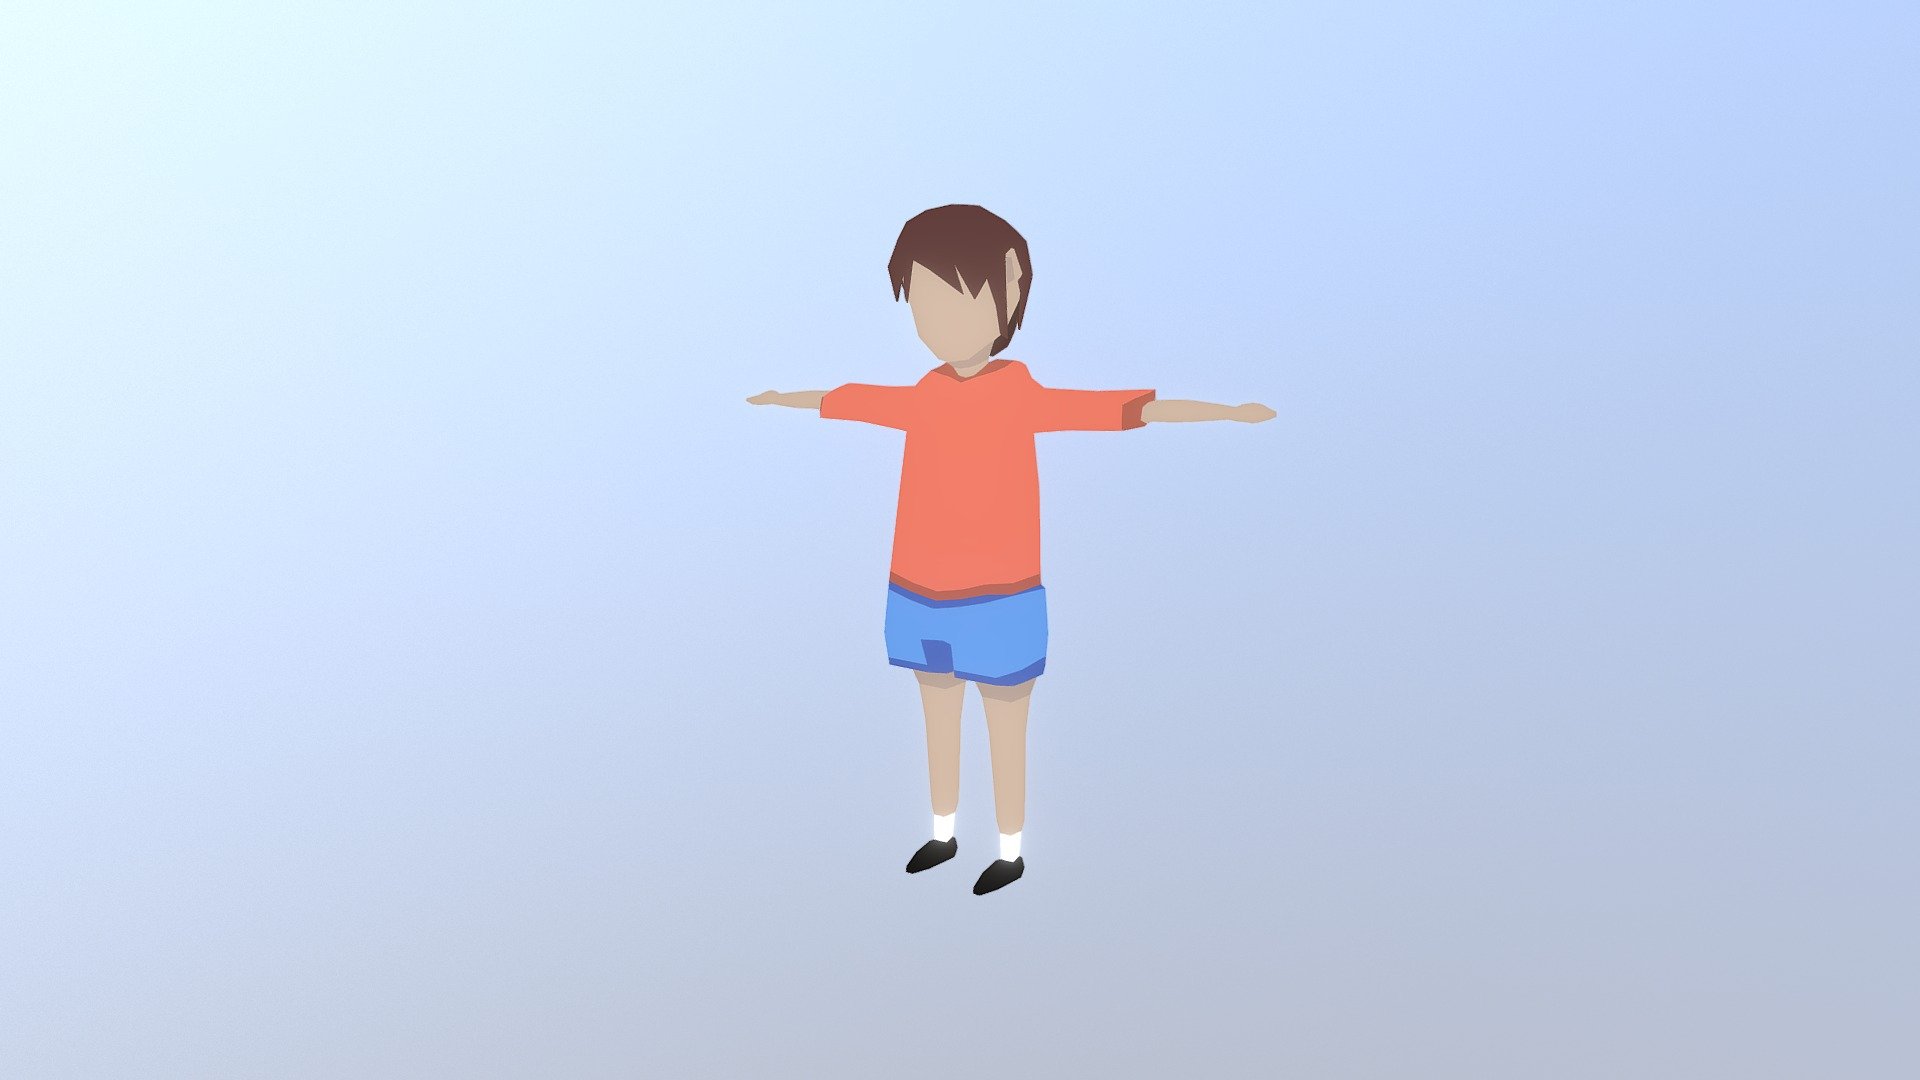 Low Poly] Character Walk Animation - 3D model by diviathan (@diviathan)  [412bb3f]